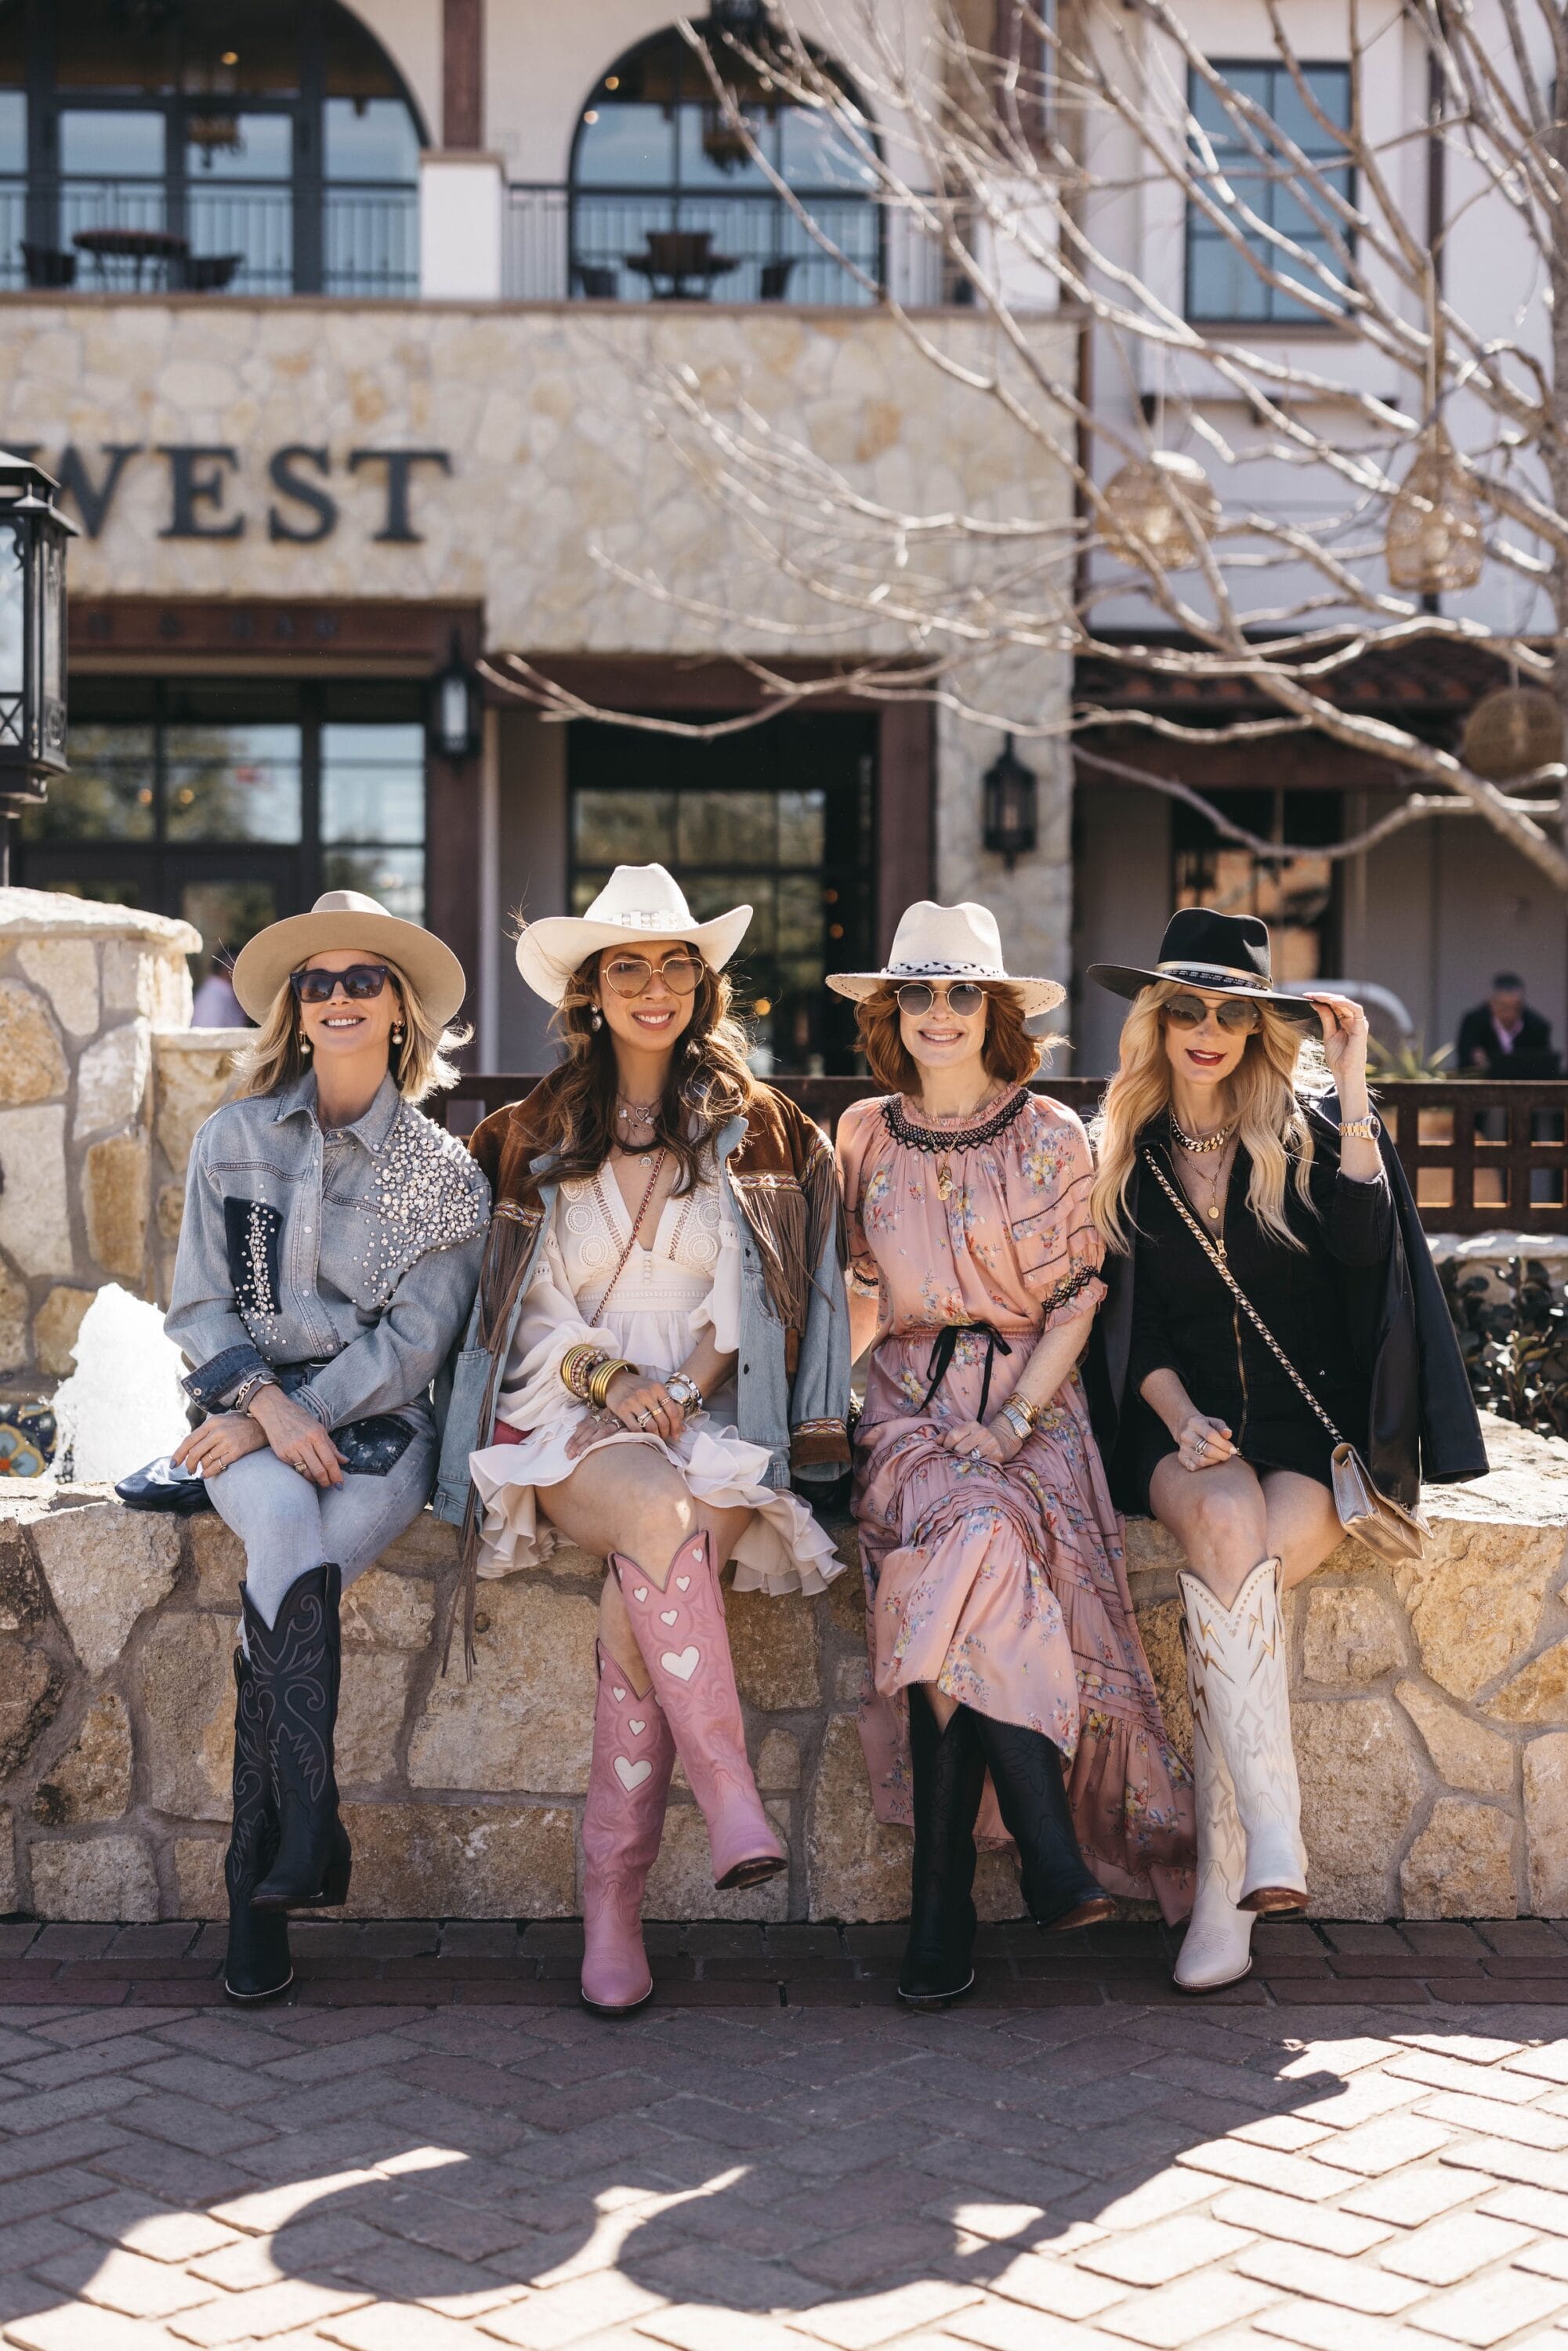 Over 40 fashion bloggers wearing western best in front of Hotel Drover.